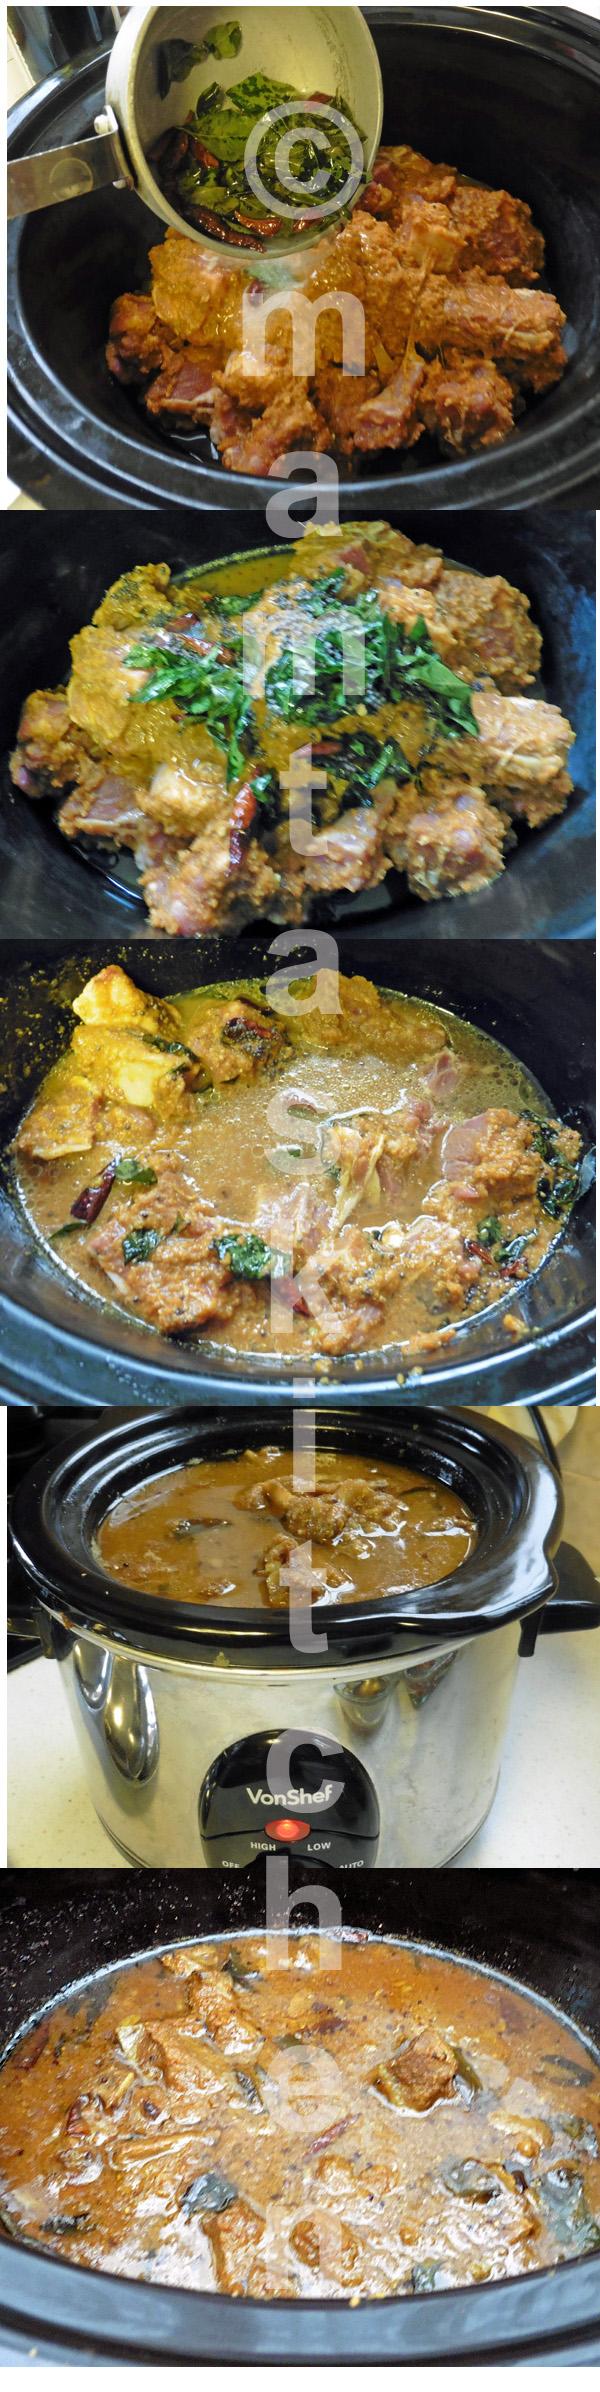 Pork or Beef or Lamb Vindaloo 2 (A Curry) In Slow Cooker